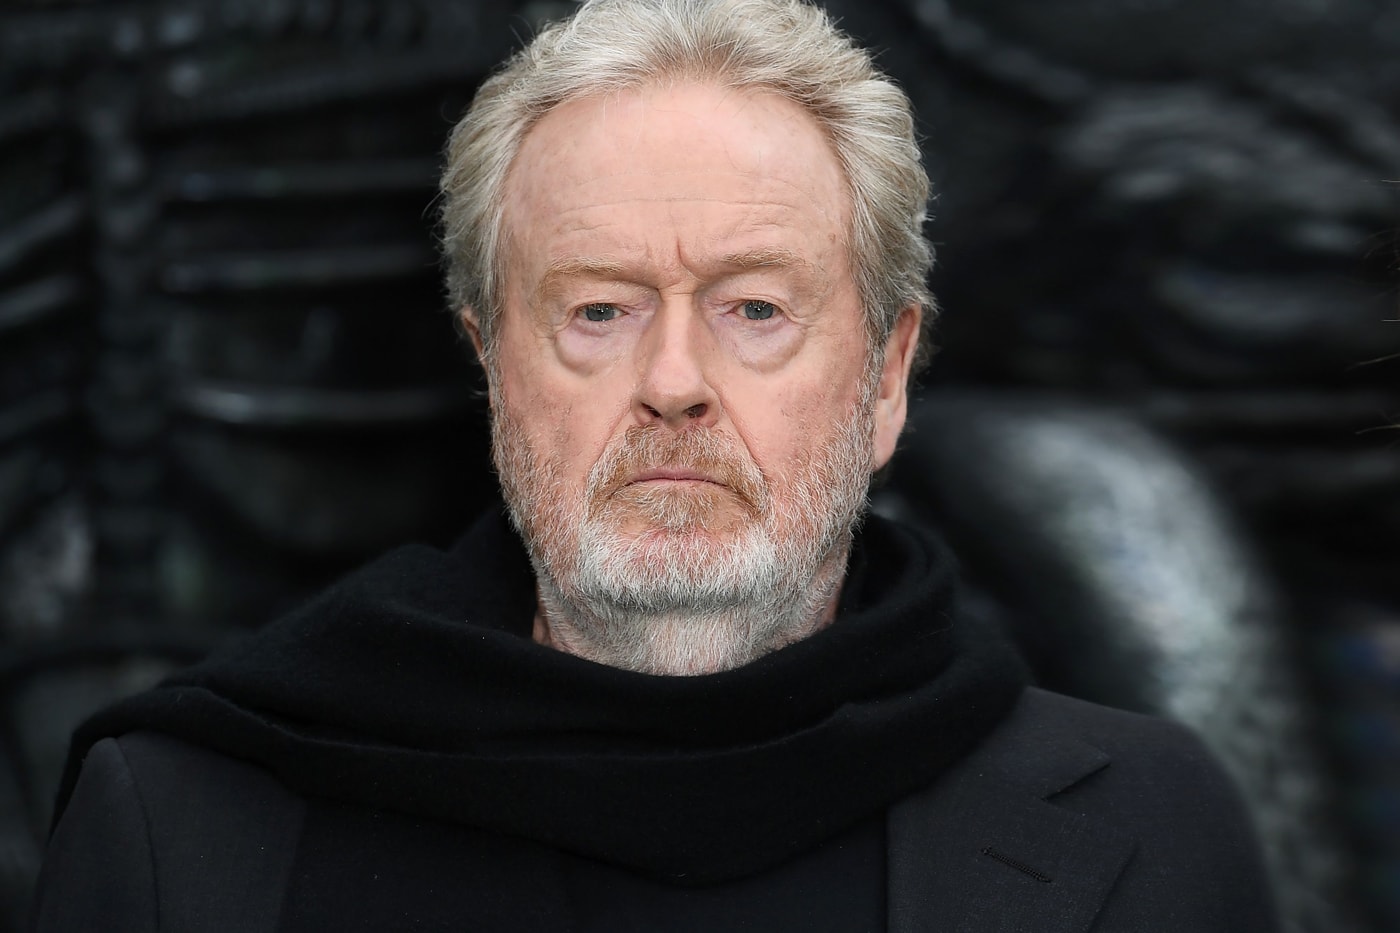 Ridley Scott To Direct 'Alien: Covenant' Sequel writing screenwriter franchise xenomorph david sci-fi horror space 40th anniversary this month ripley 